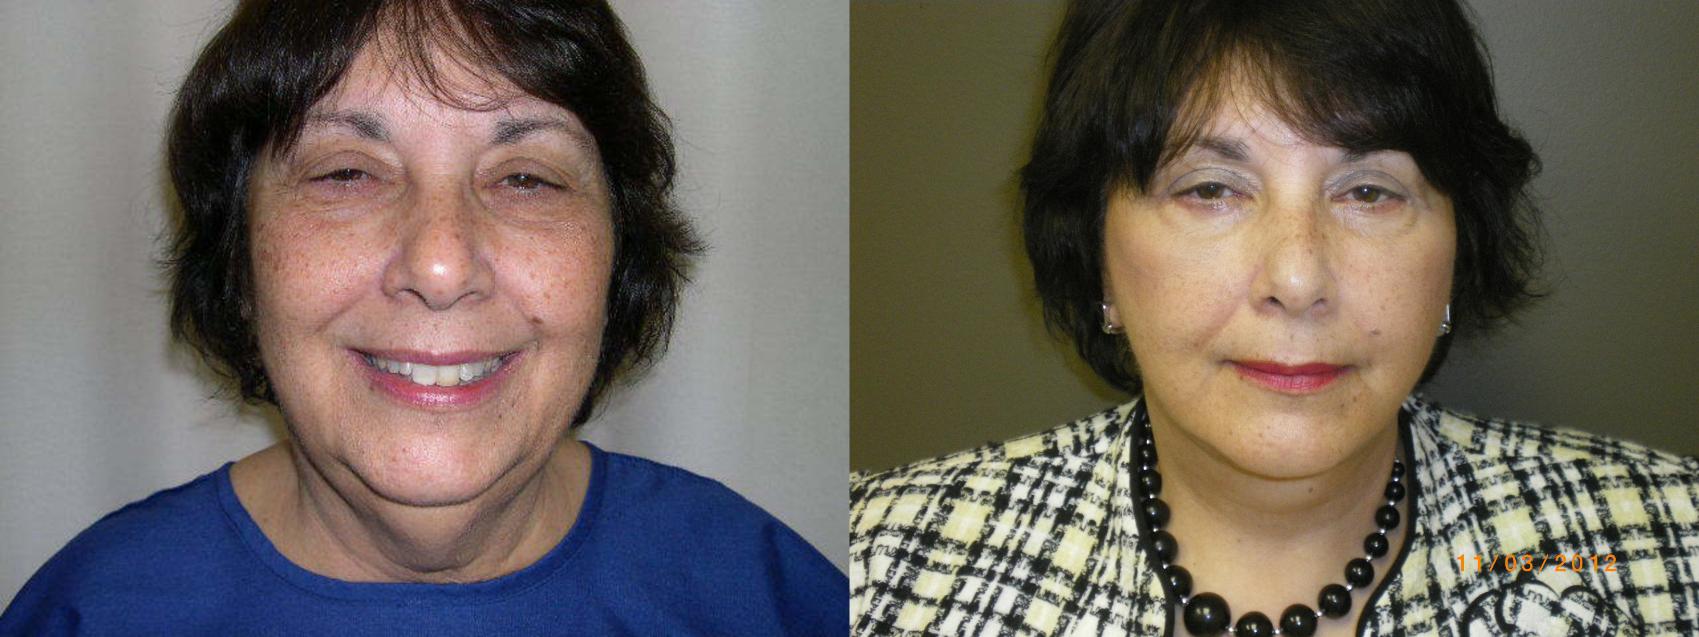 Facelift Before & After Photo | Atlanta, GA | Plastic Surgery Center of the South